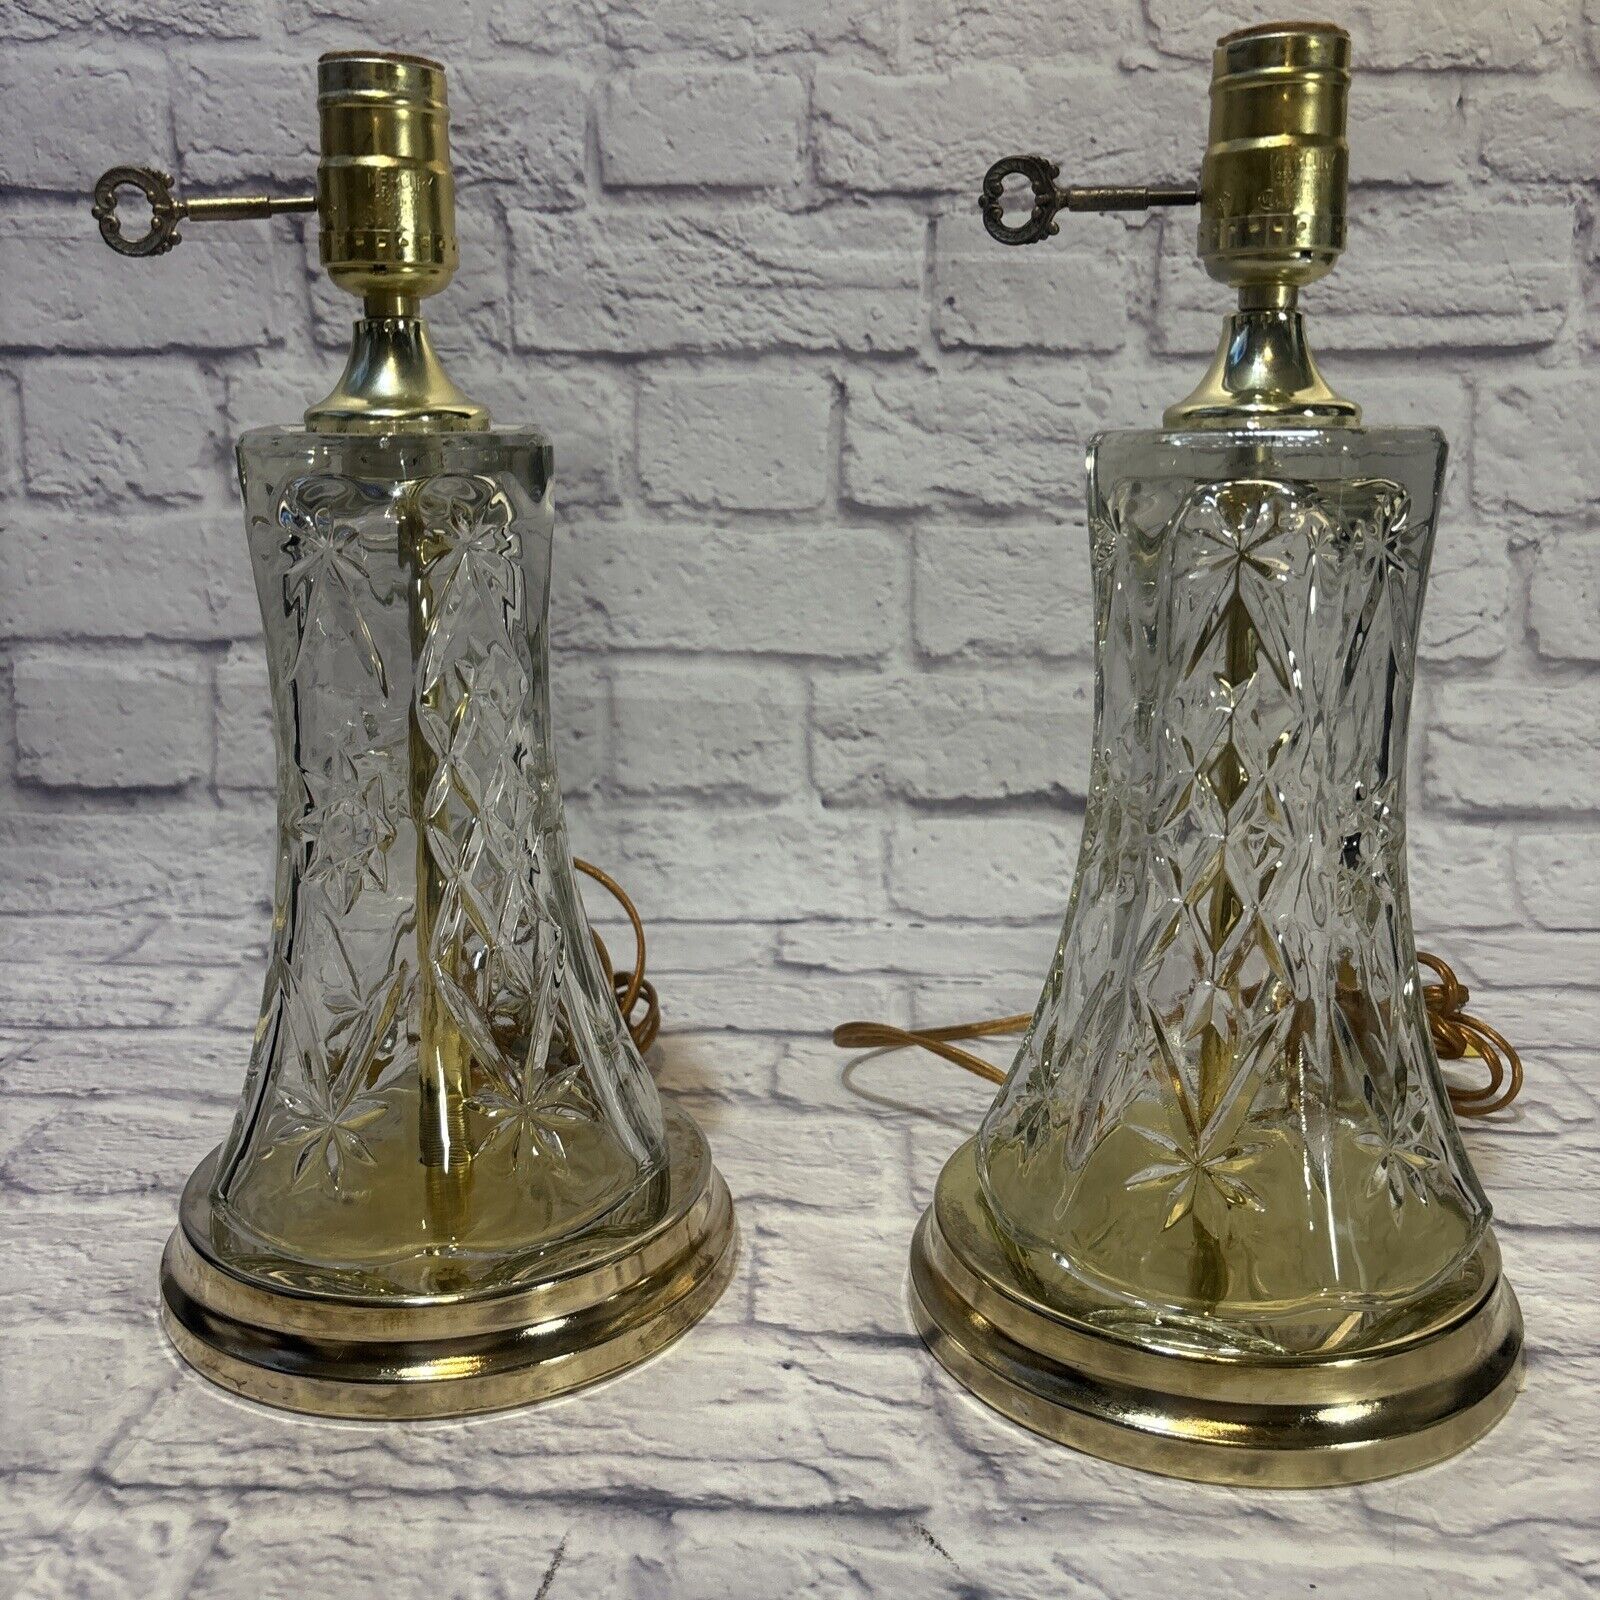 PAIR OF MID CENTURY ART MODERN PRESSED GLASS LAMPS